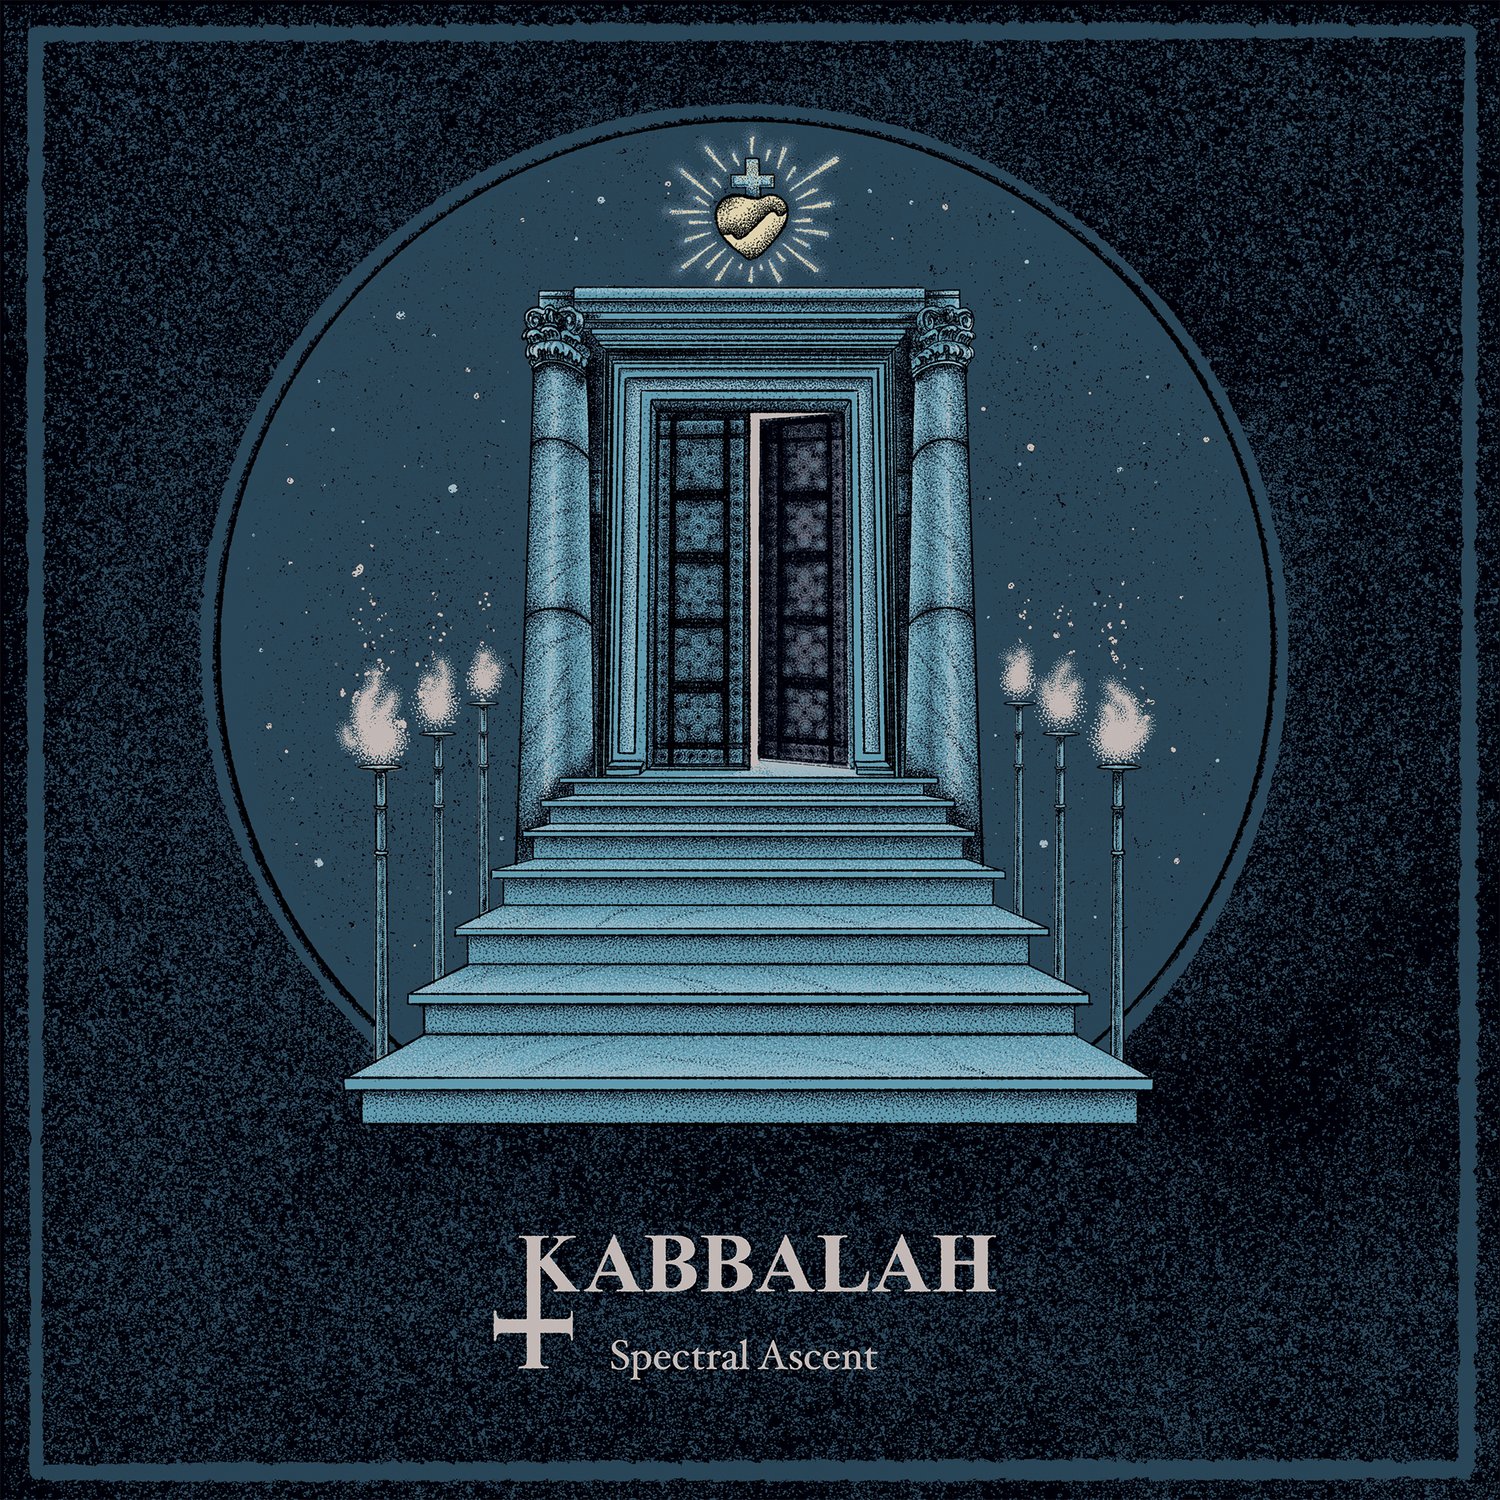 Image of Kabbalah - Spectral Ascent Limited Digipak CD (Reissue)